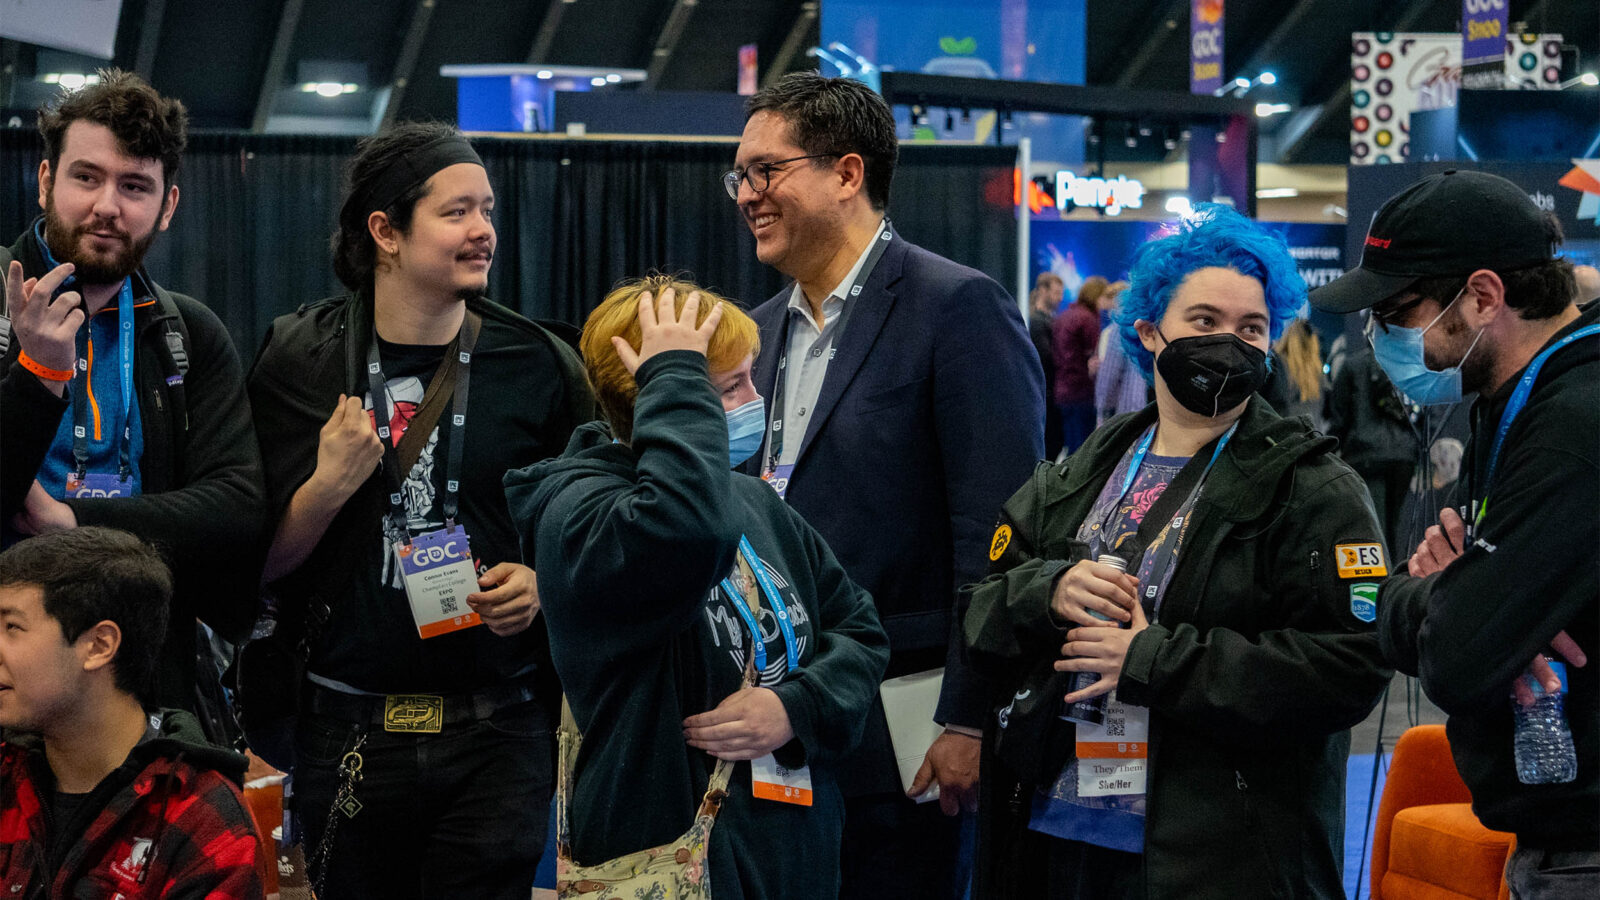 President Hernandez and group of students at a gaming conference